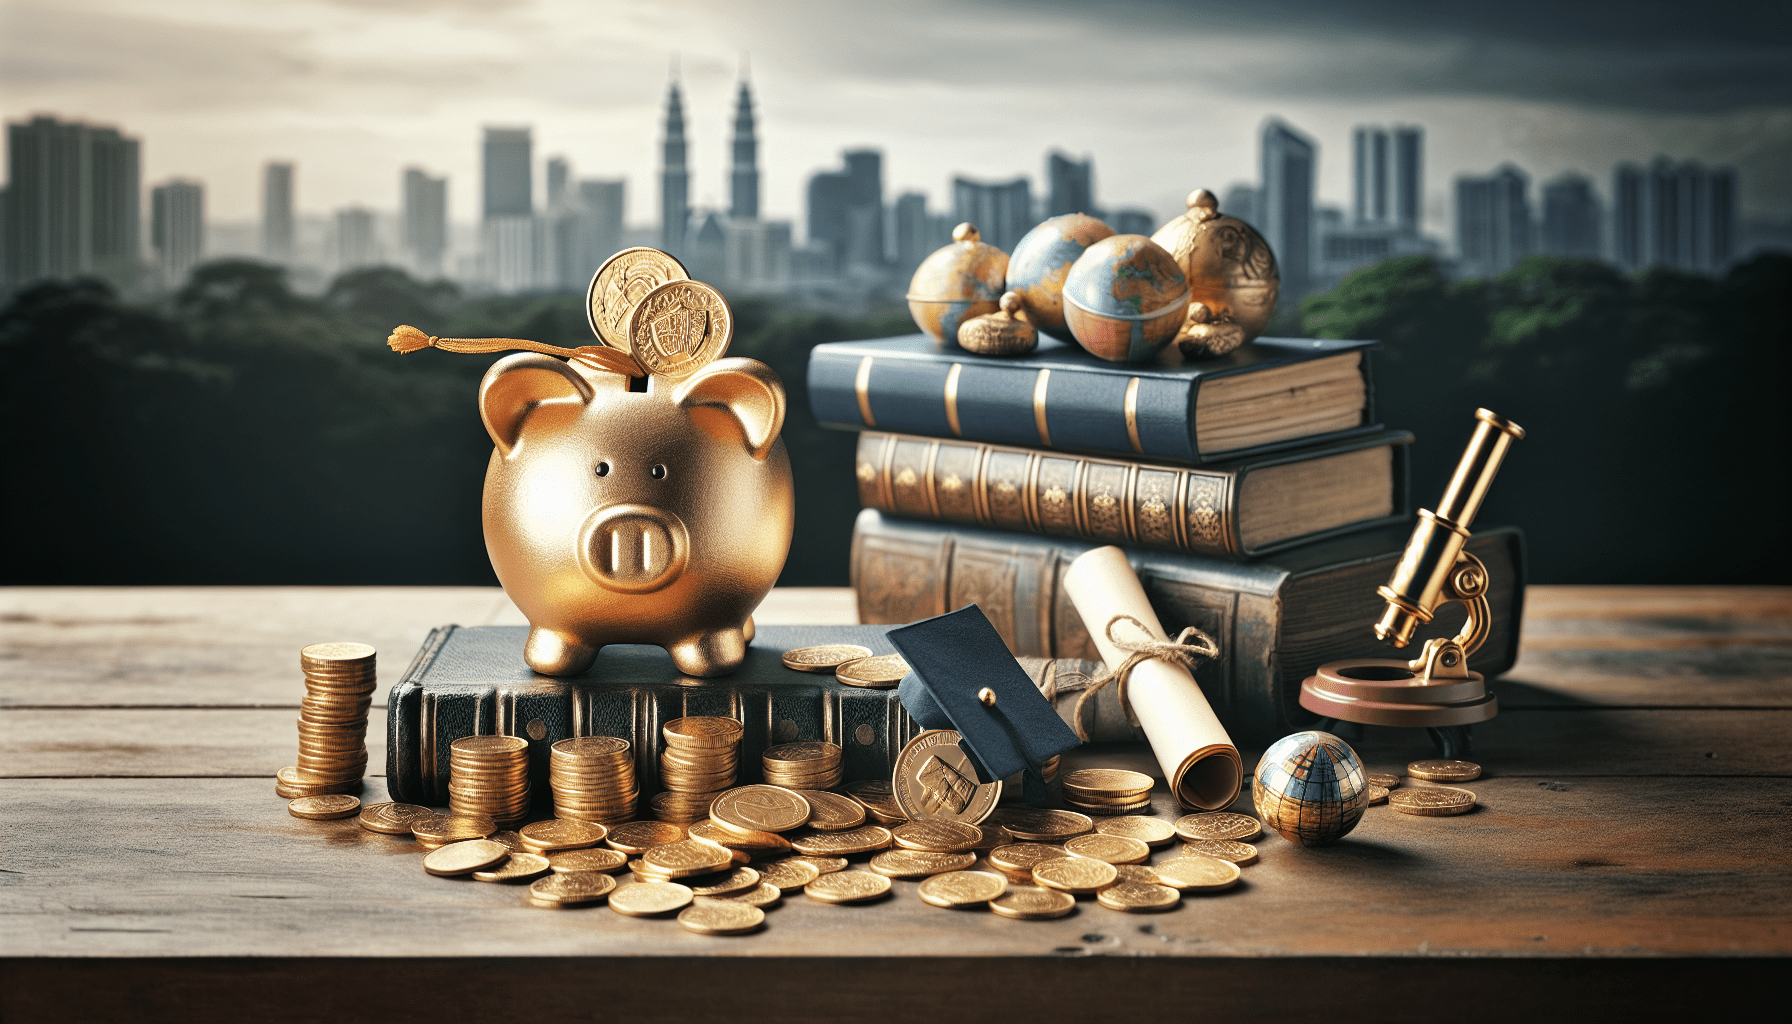 Can I Invest In Gold For My Child’s Education With Malaysian Banks?